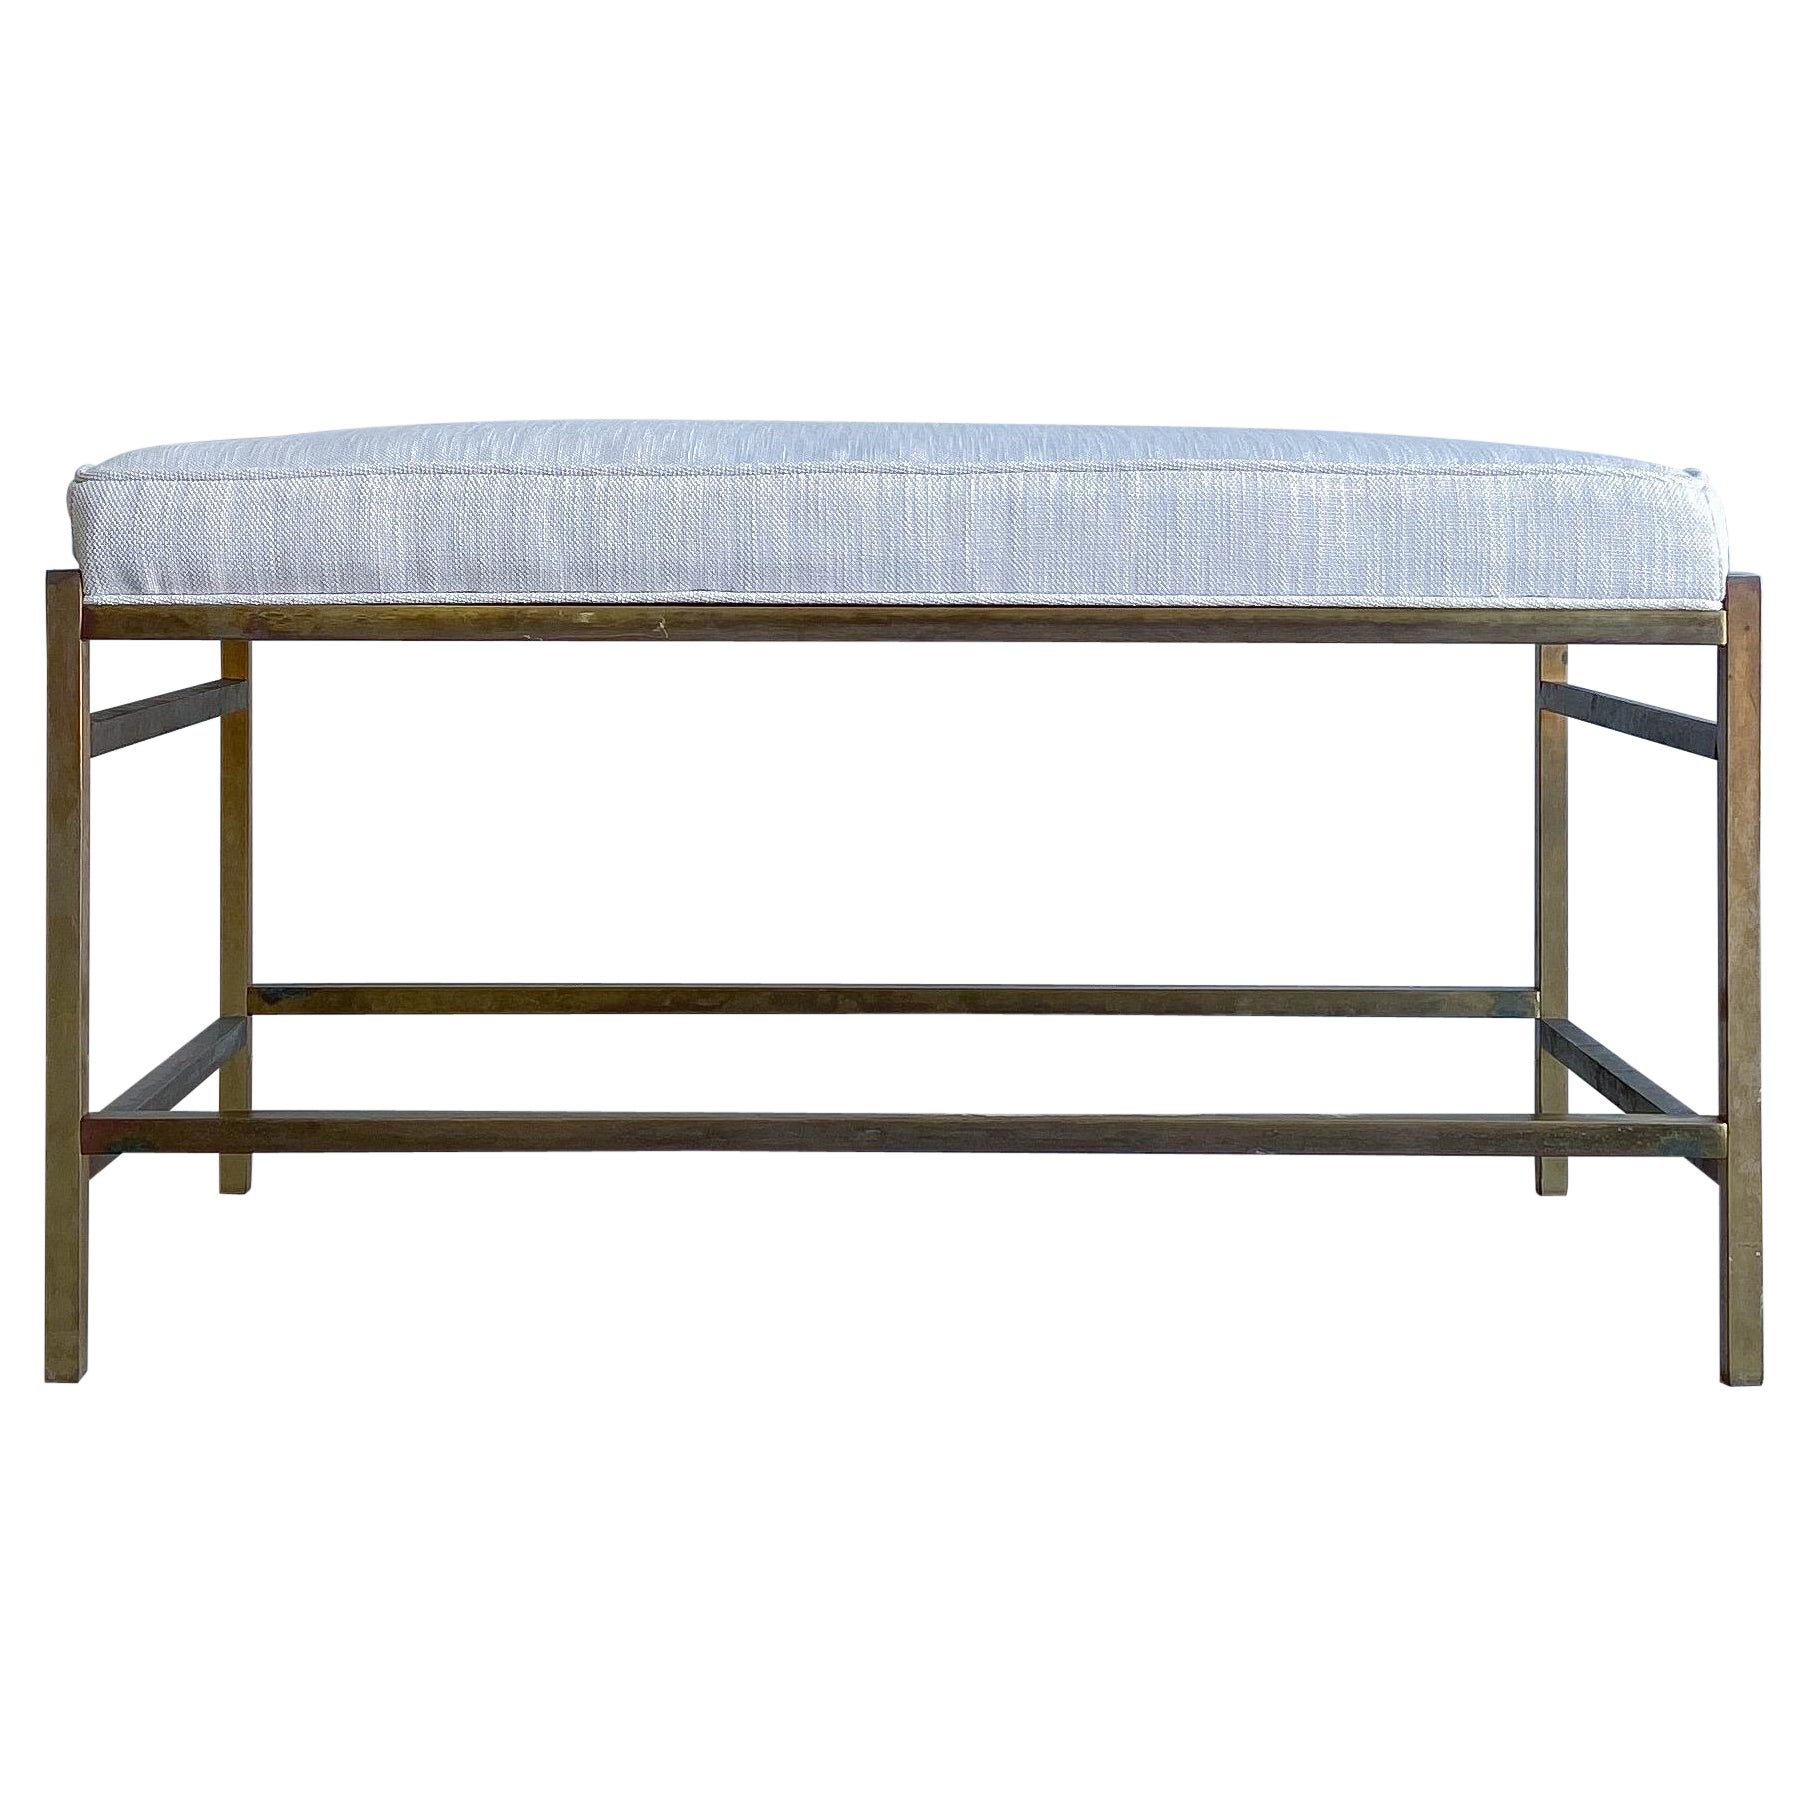 Mid-Century Modern Architectural Brass Bench in the style of Harvey Probber